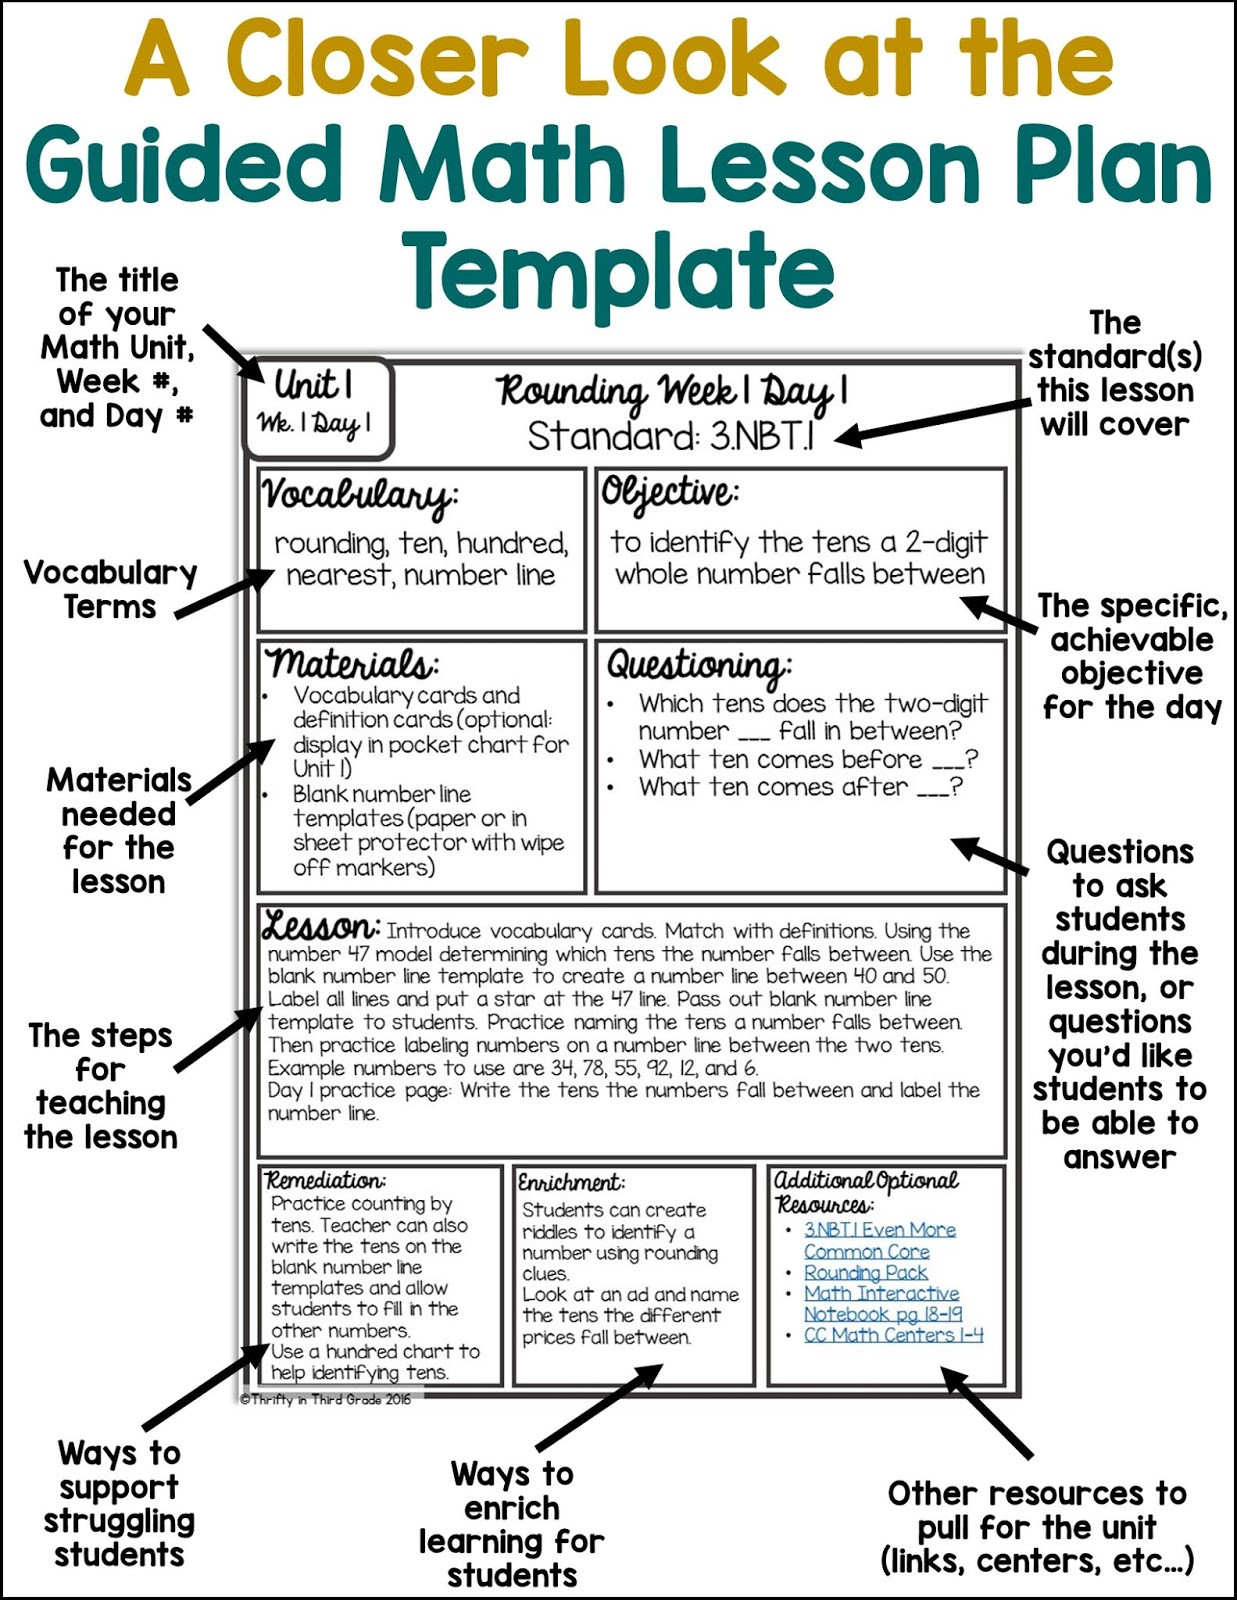 Lesson Plan for Maths Guided Math Lesson Plan Template